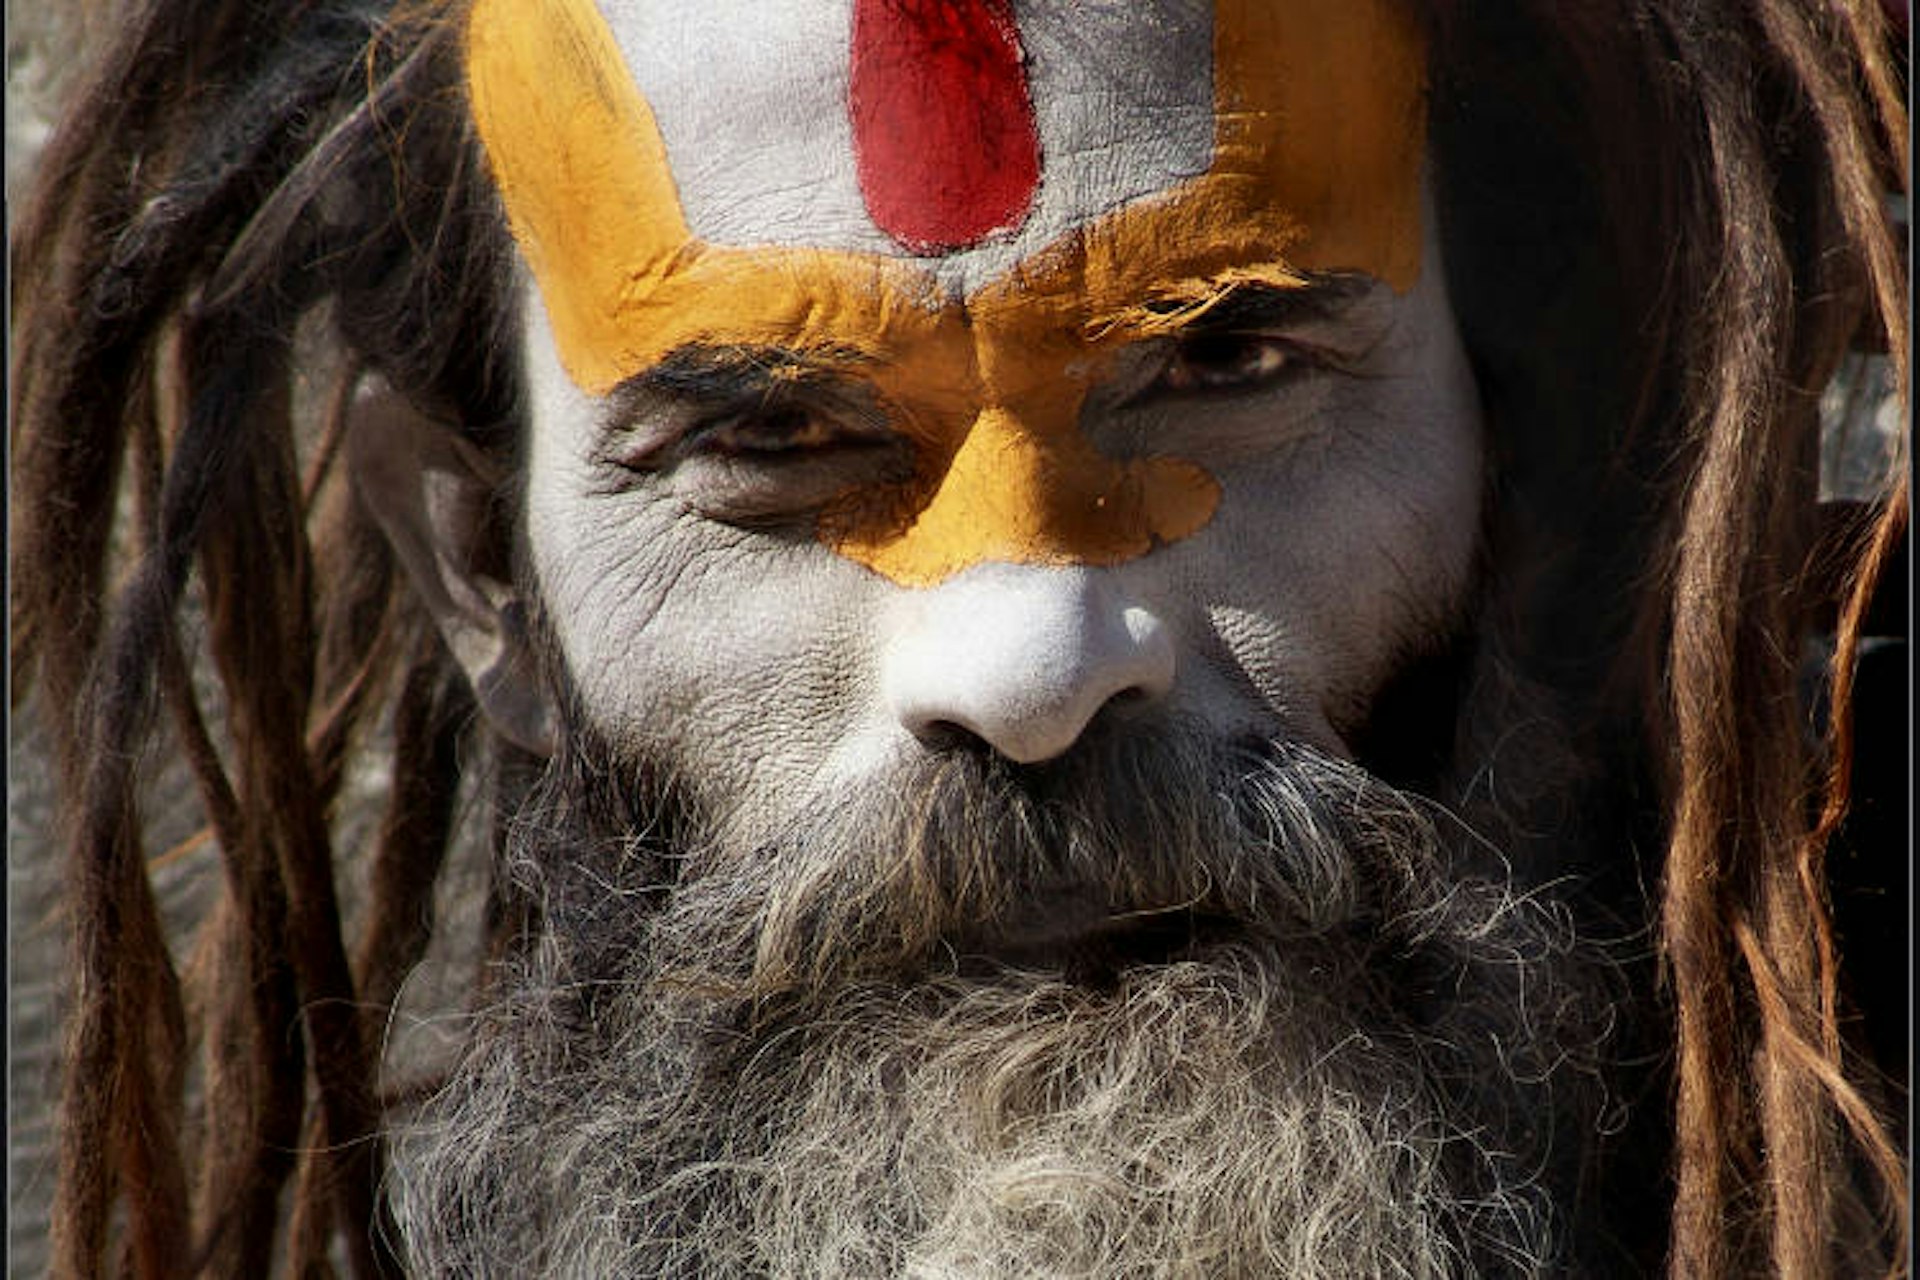 Sadhu in ceremonial face-paint at Pashupatinath. Image by Sukanto Debnath / CC BY-2.0.